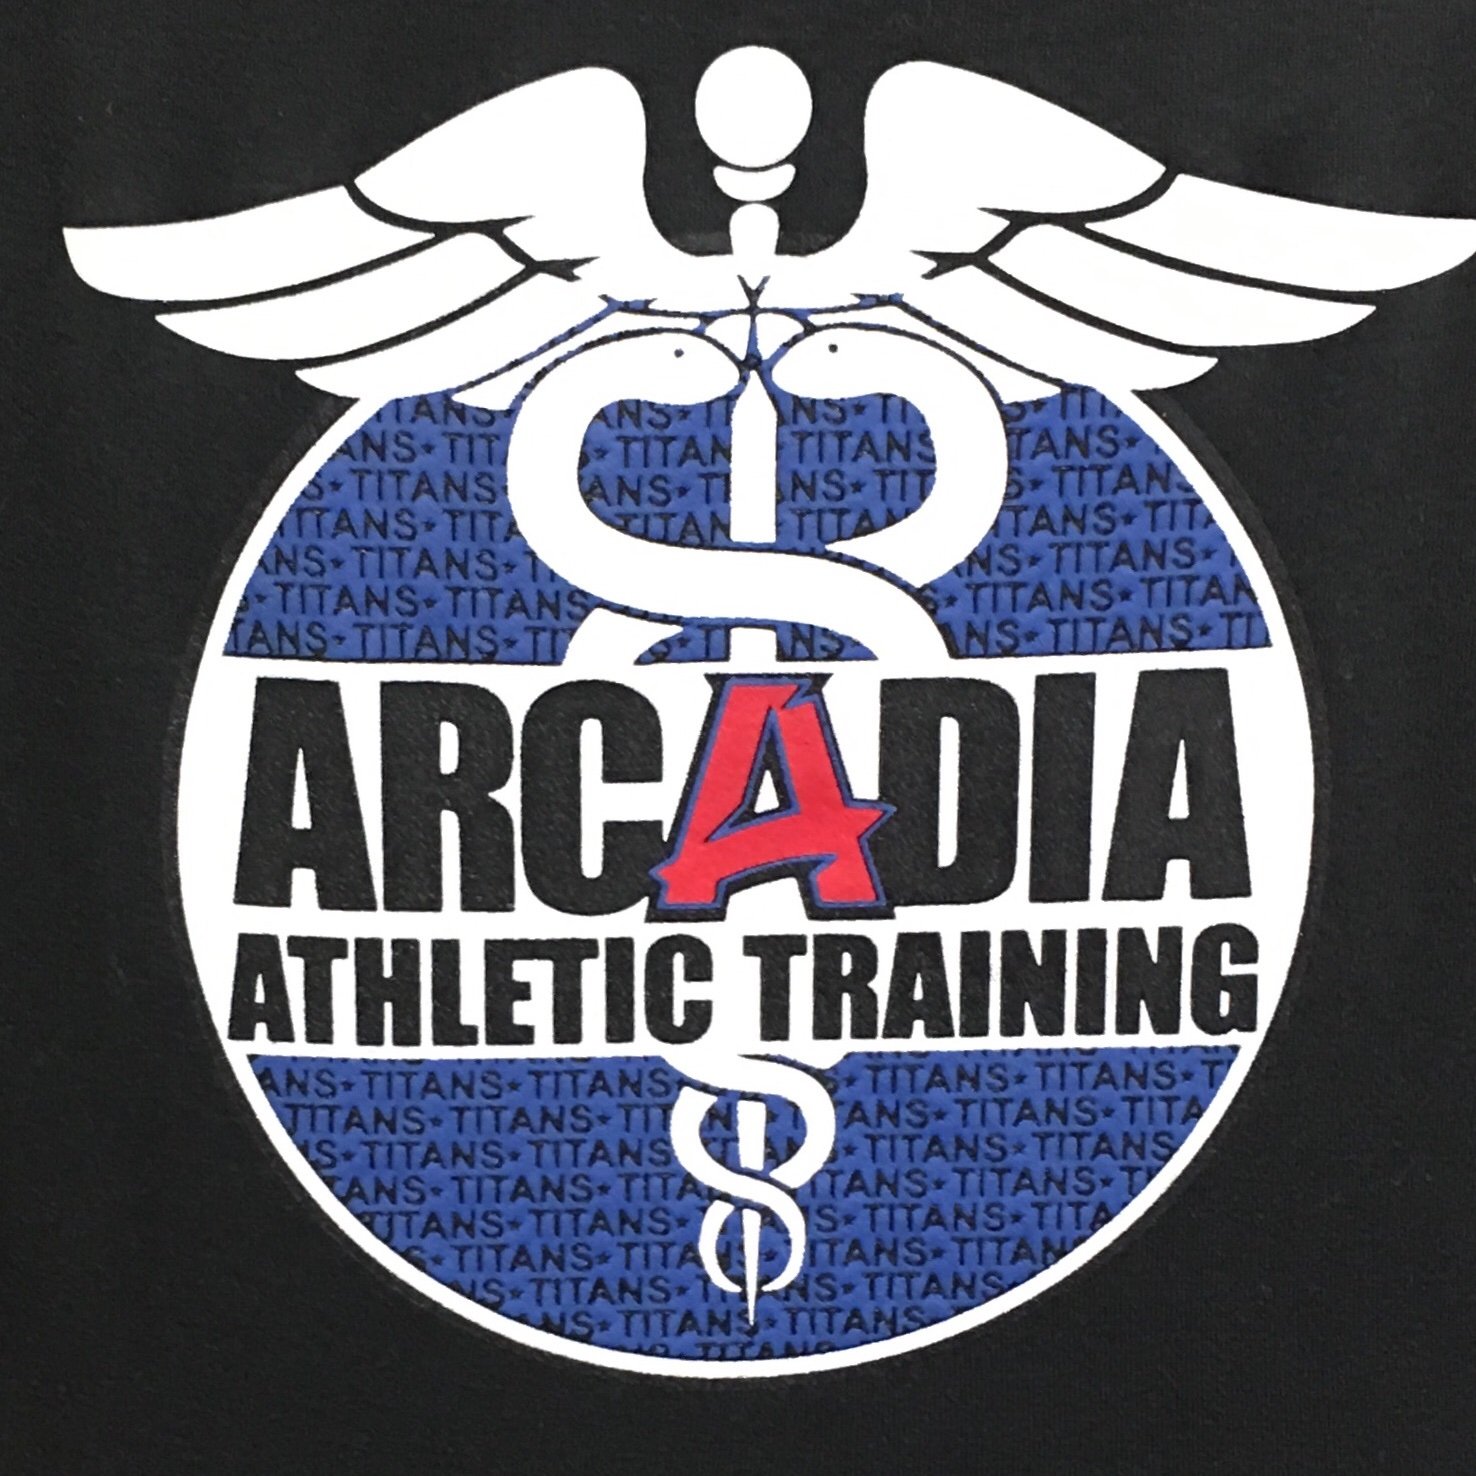 Official account for Arcadia High School Athletic Training